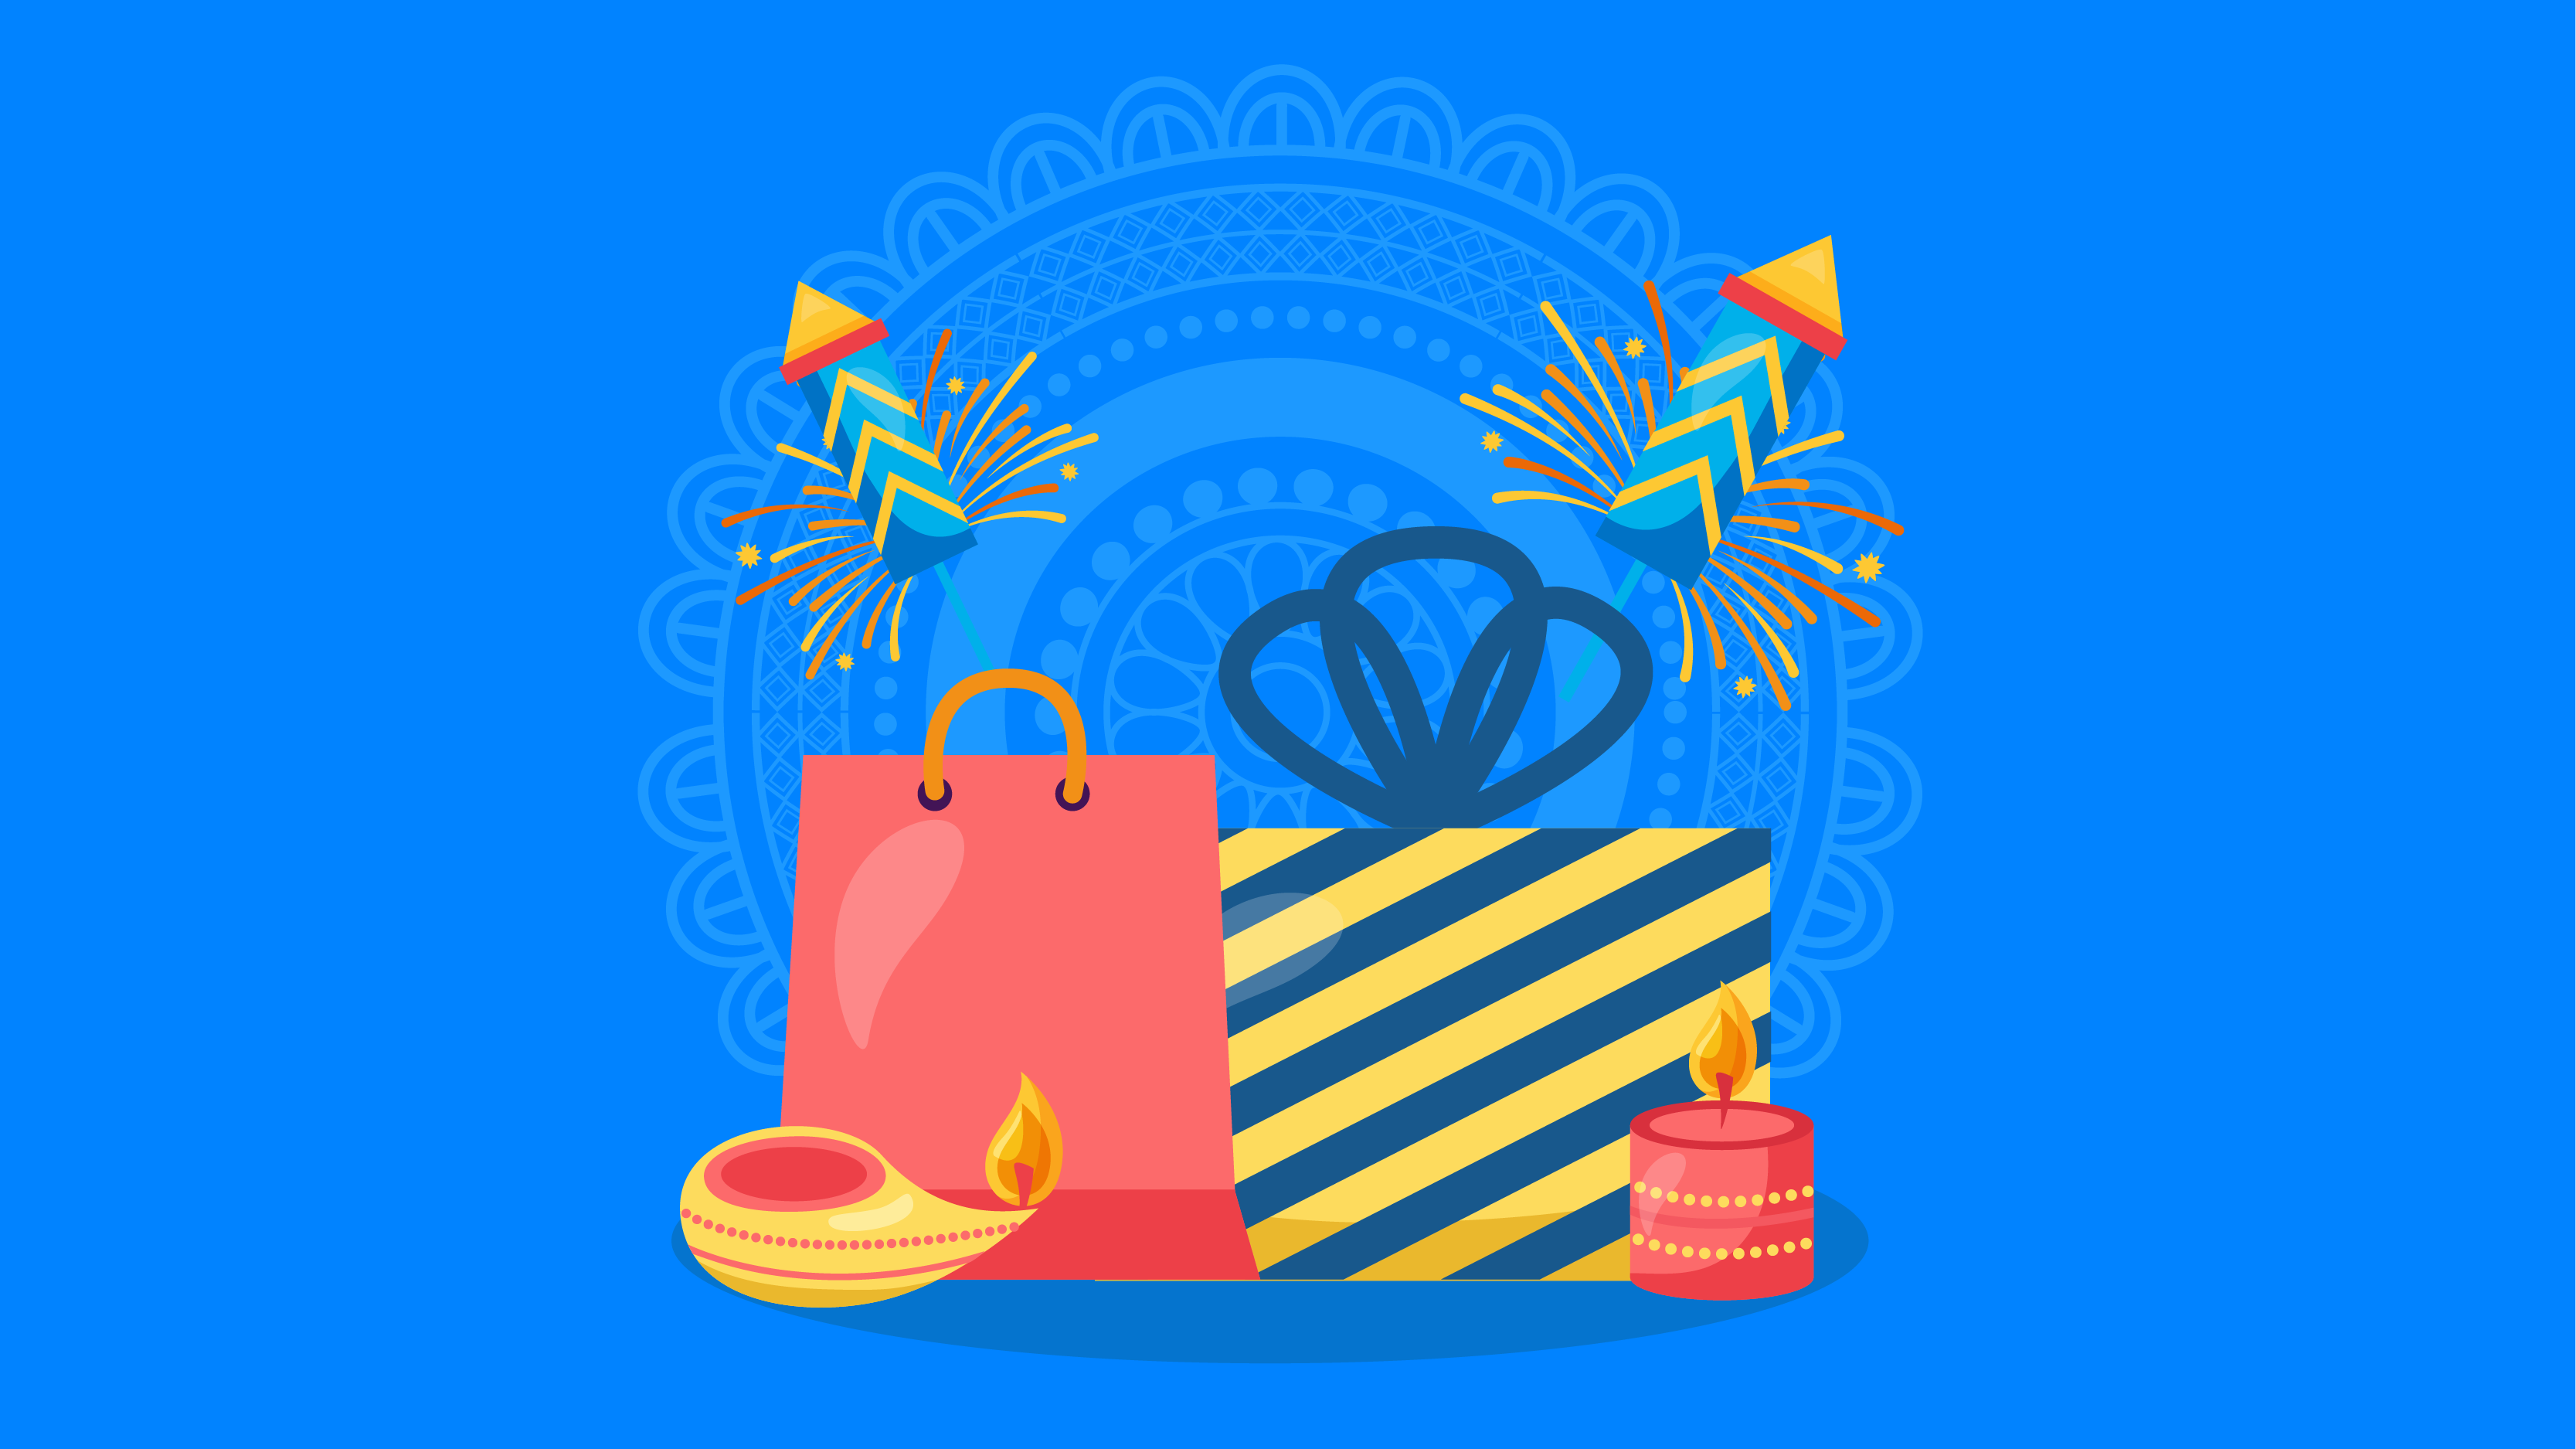 Diwali gifts for employees